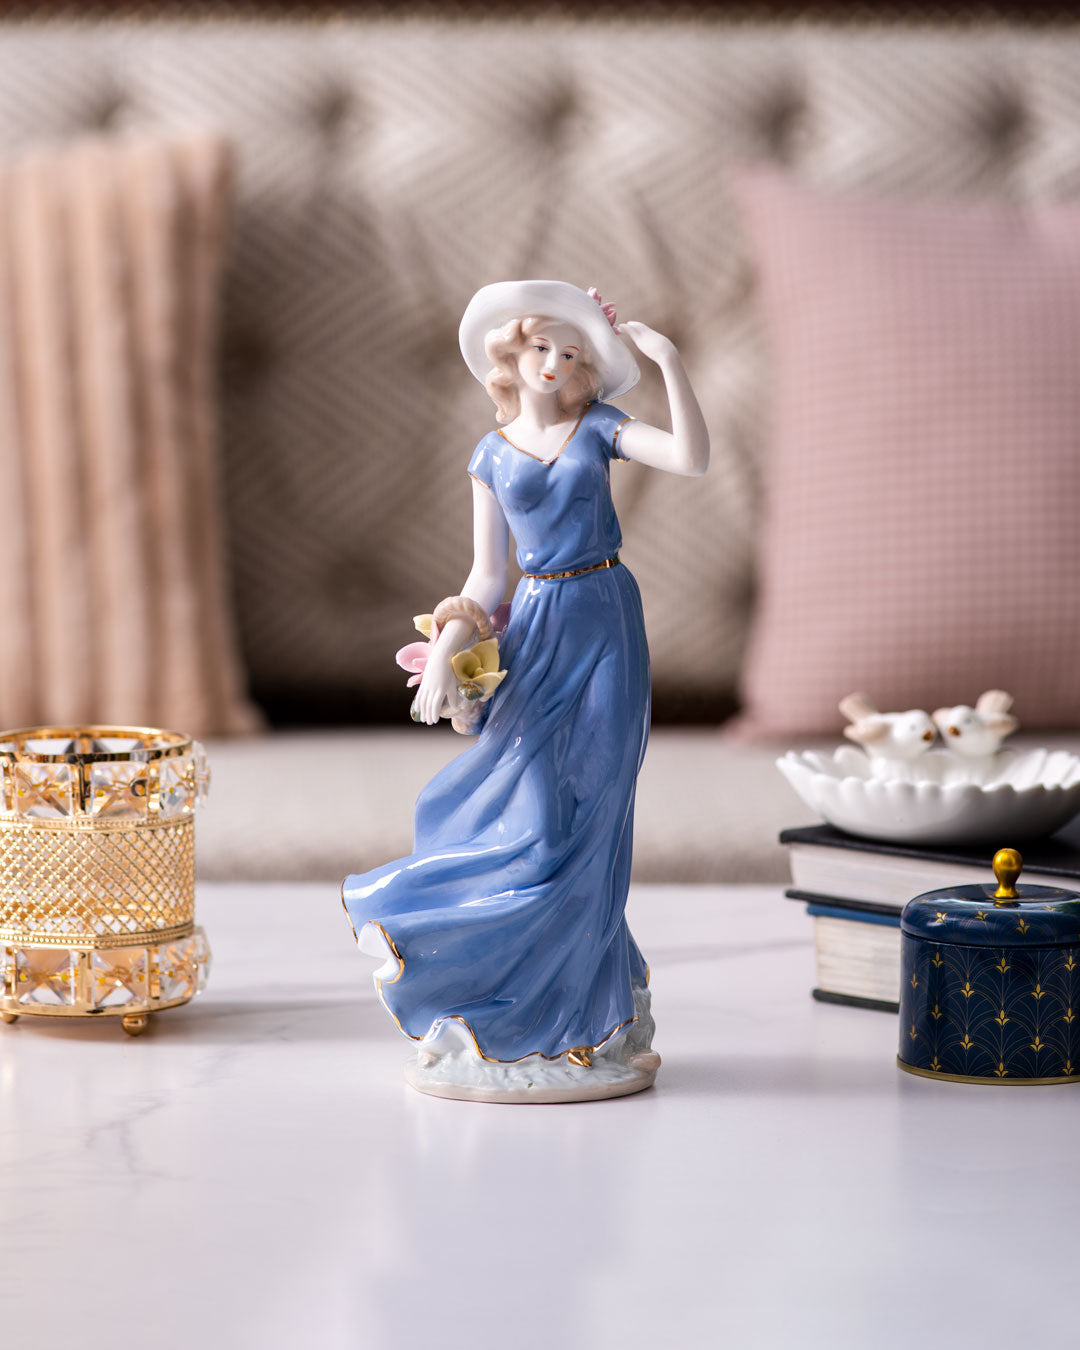 Elegant Victorian Lady Porcelain Figurine in Blue Dress with Hat and Basket, Classic Home Decor